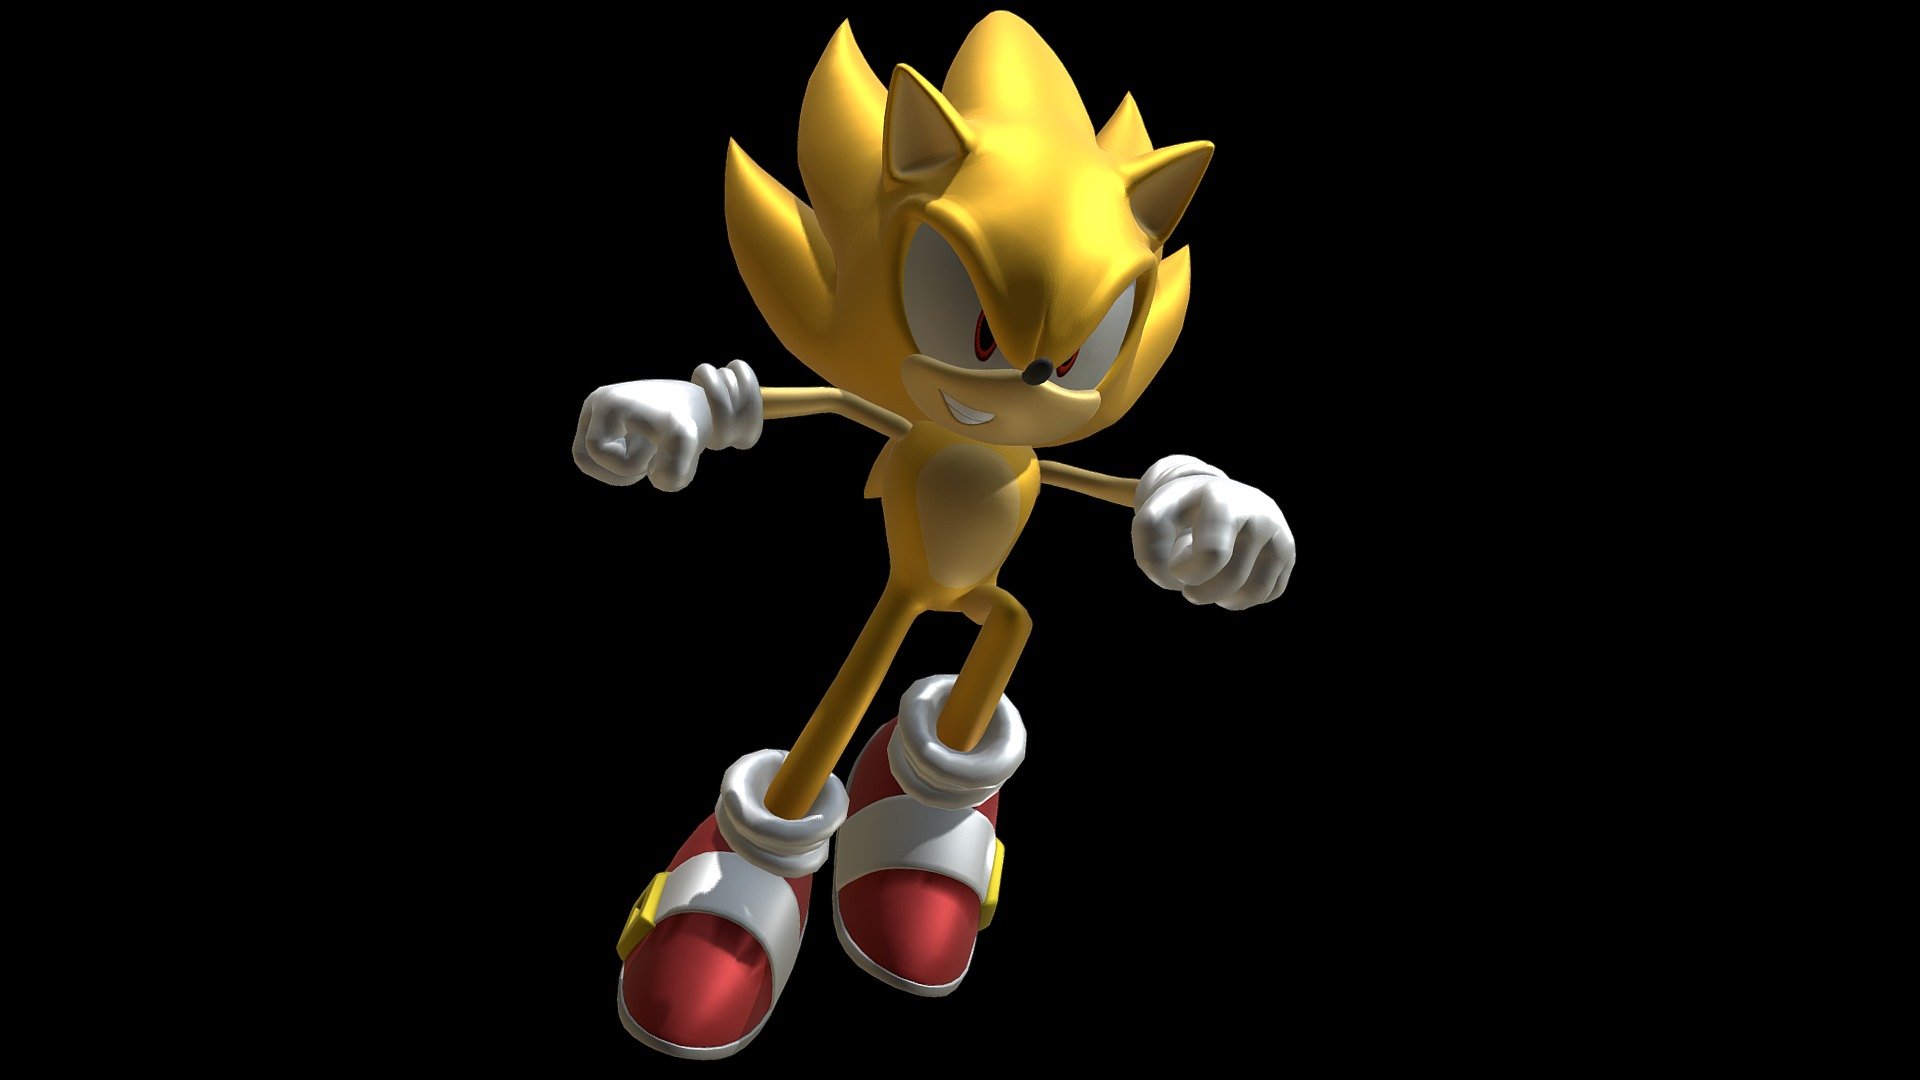 Super Sonic The Hedgehog free to download, but if you use it for anything please give credit to me the creator. Thank you 3d model